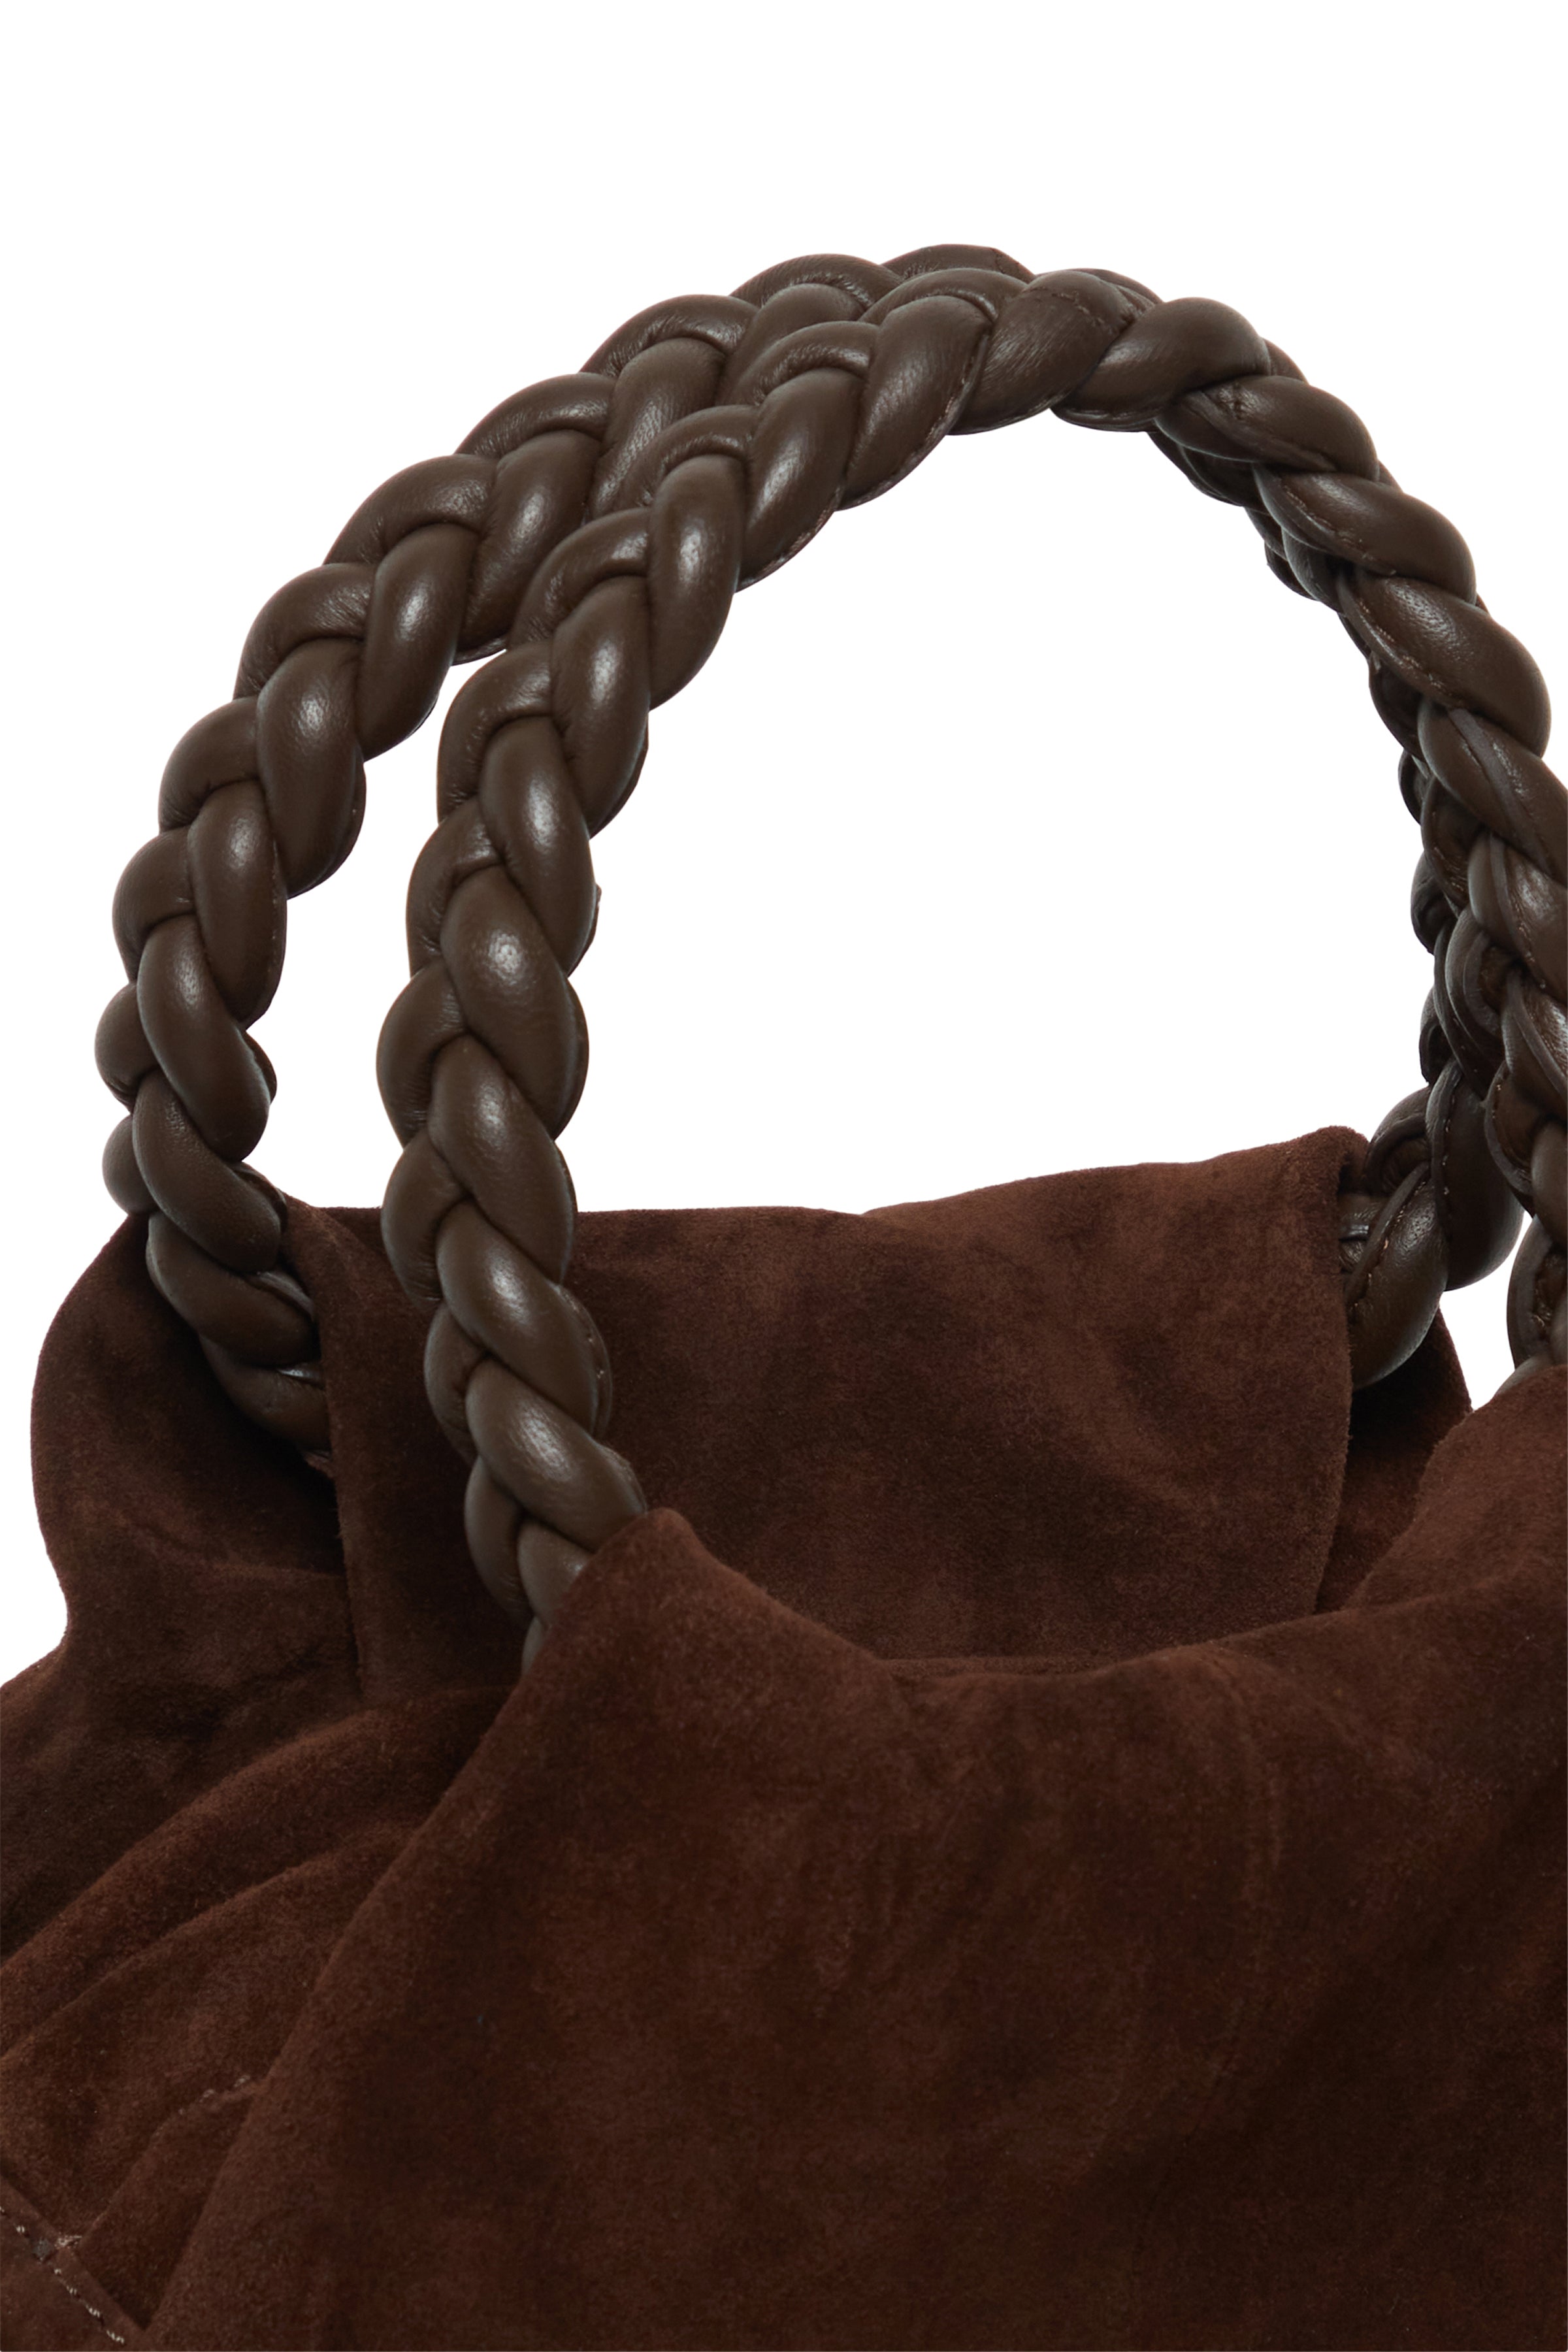 Braided Handle Leather Bag